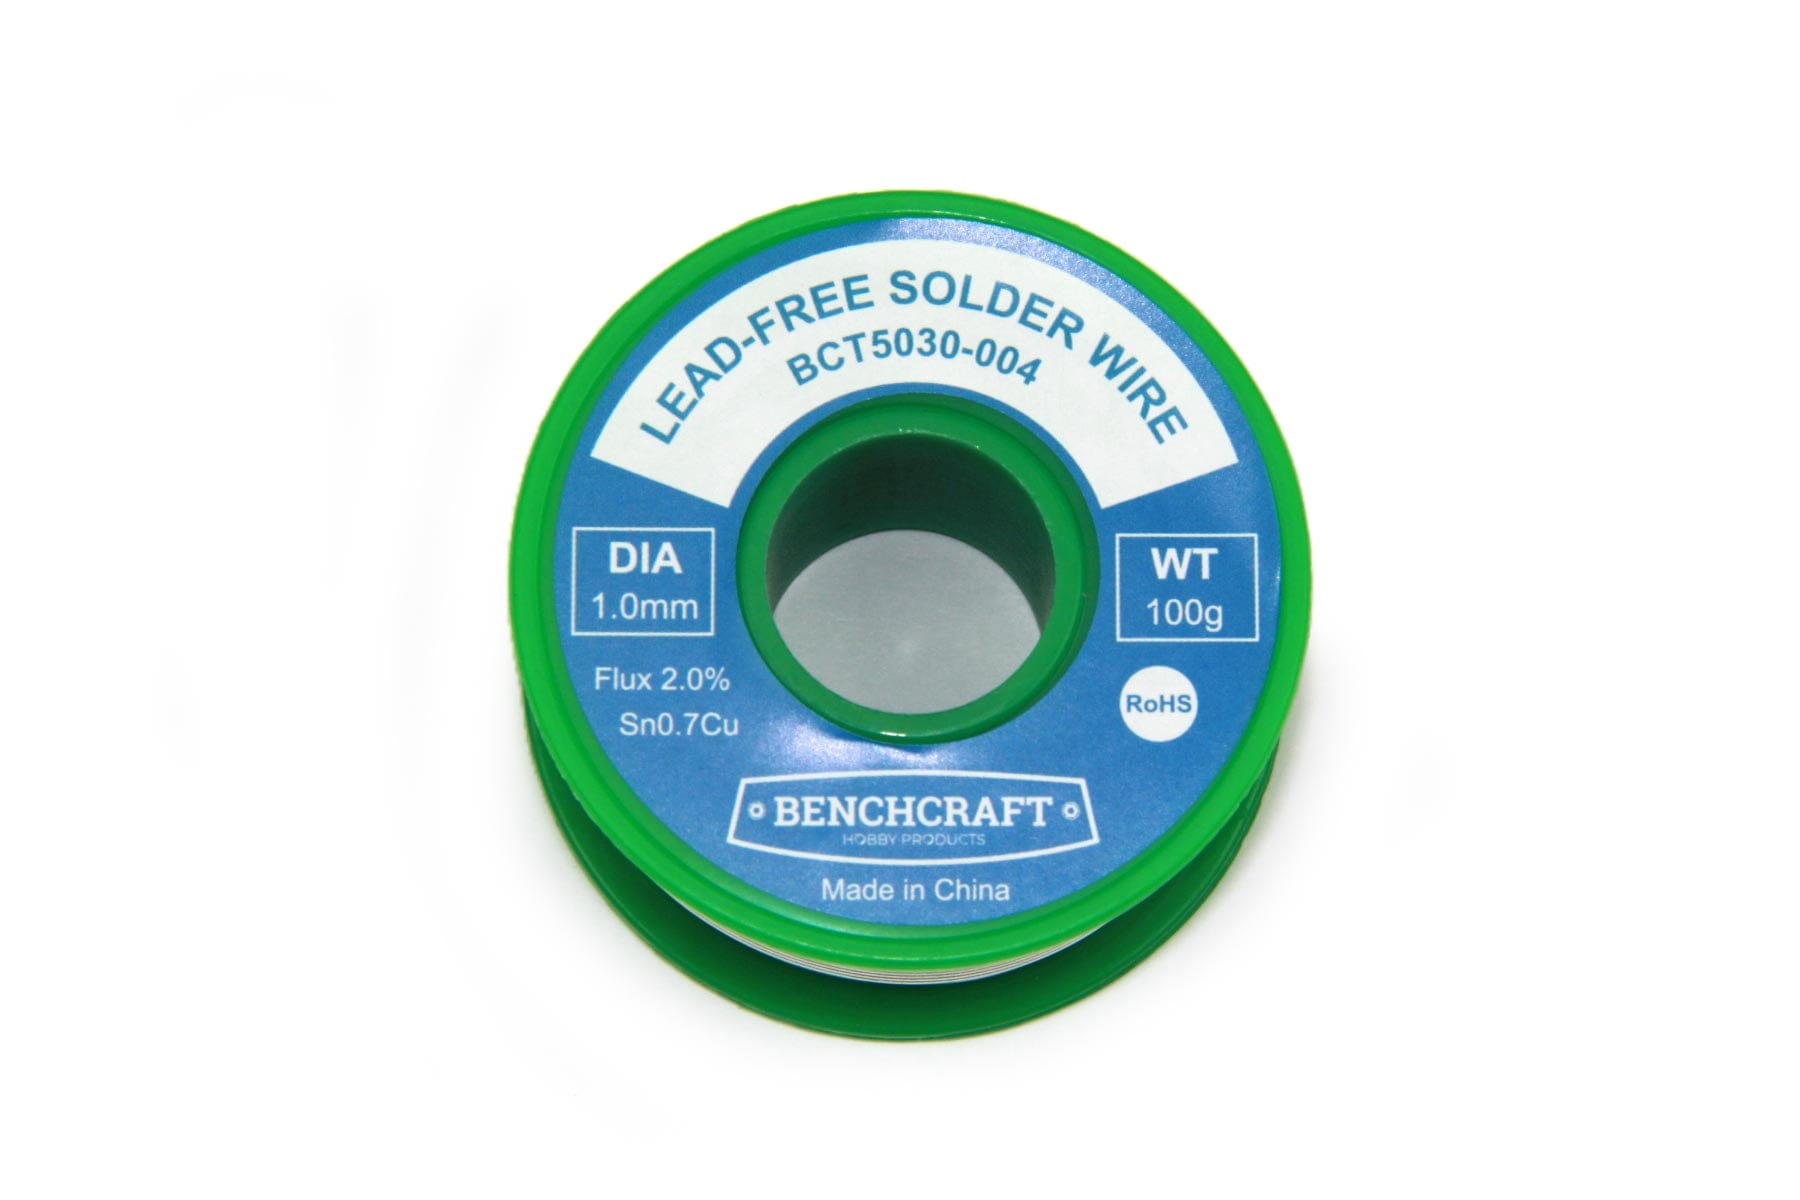 BenchCraft Lead-Free Solder with 1.0mm diameter 100g/Reel BCT5030-004